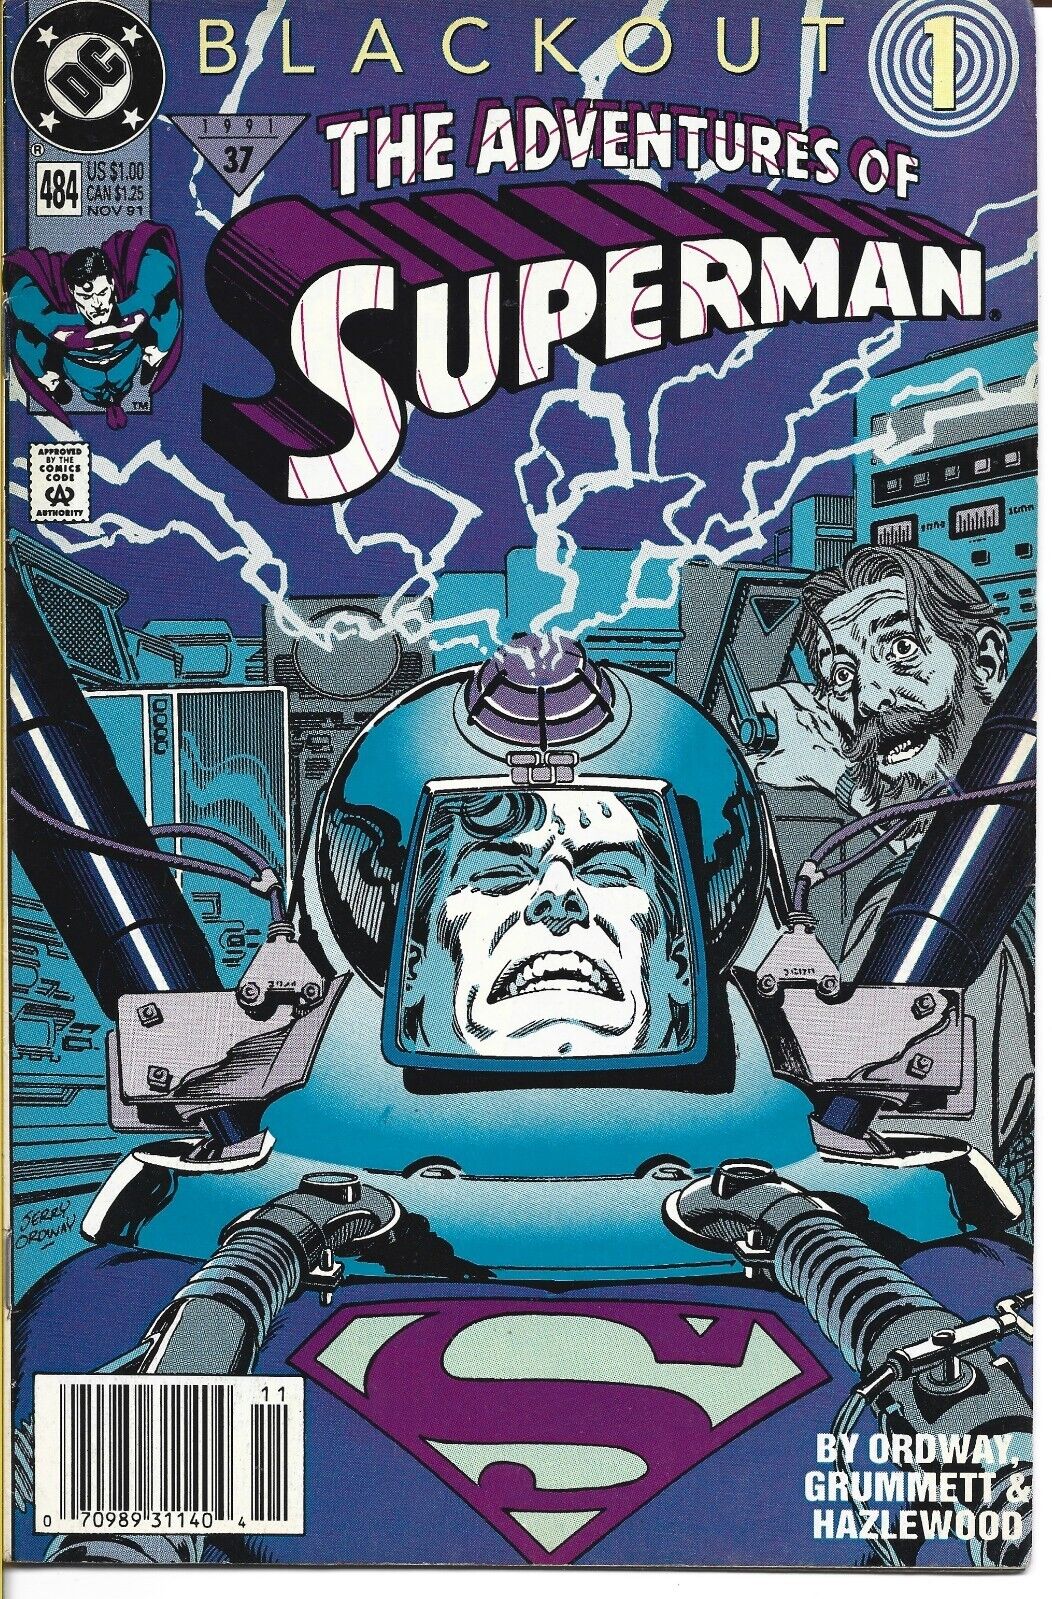 THE ADVENTURES OF SUPERMAN #484 DC COMICS 1991 BAGGED AND BOARDED